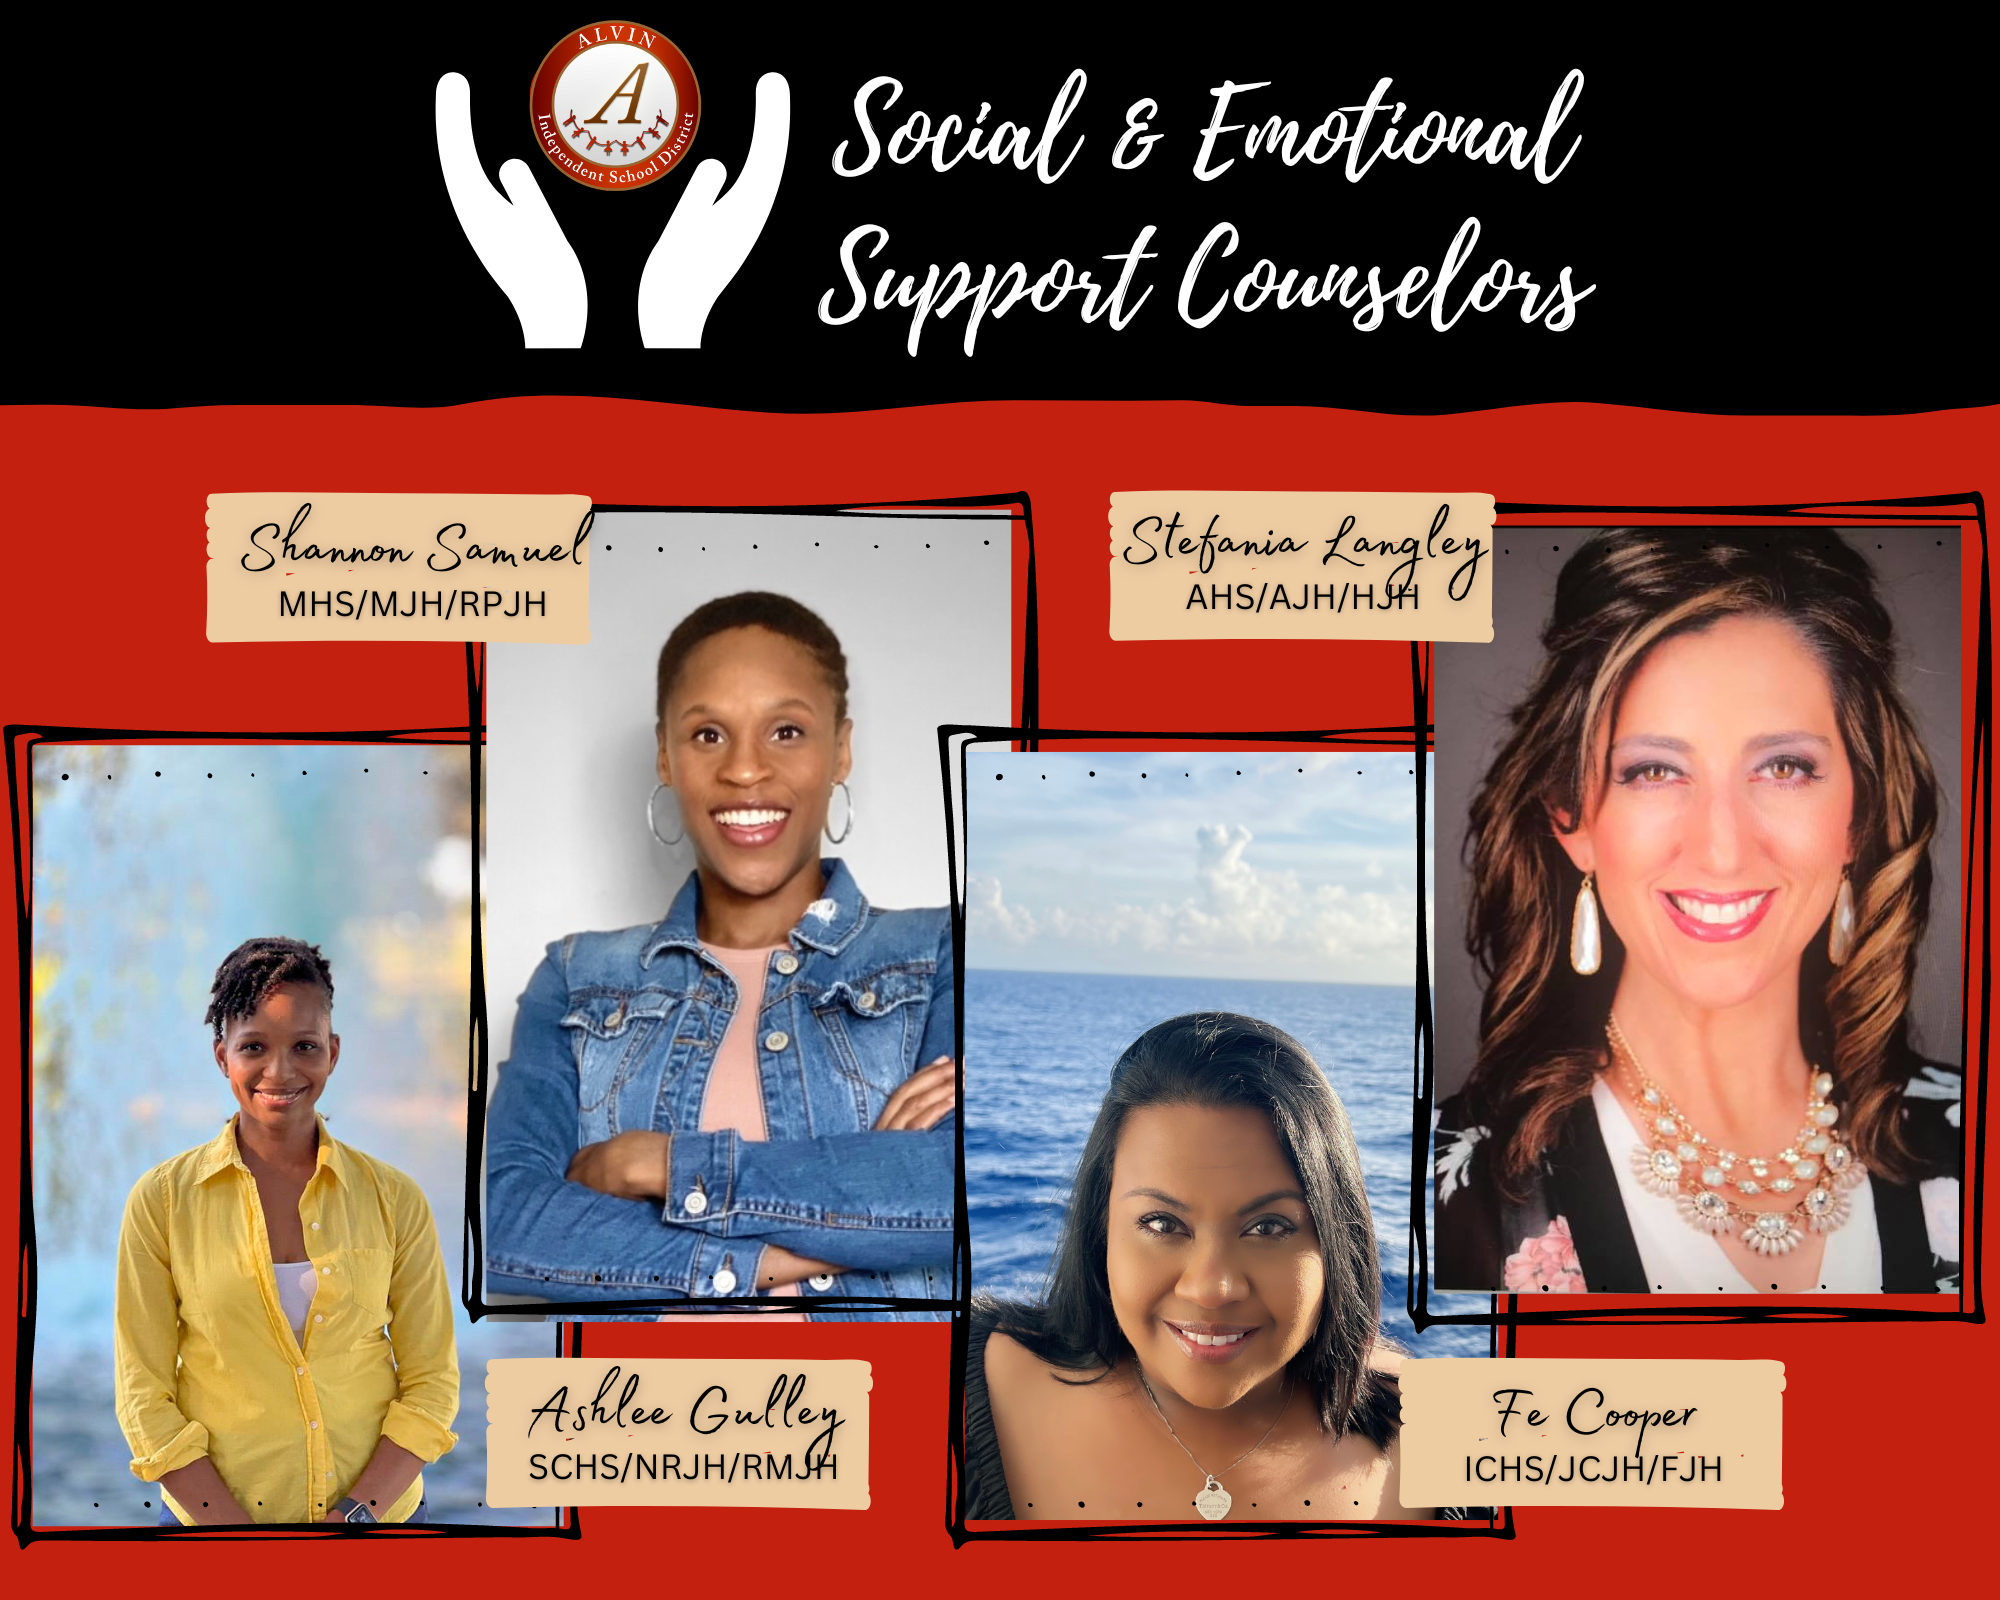 Social and emotional counselor pic